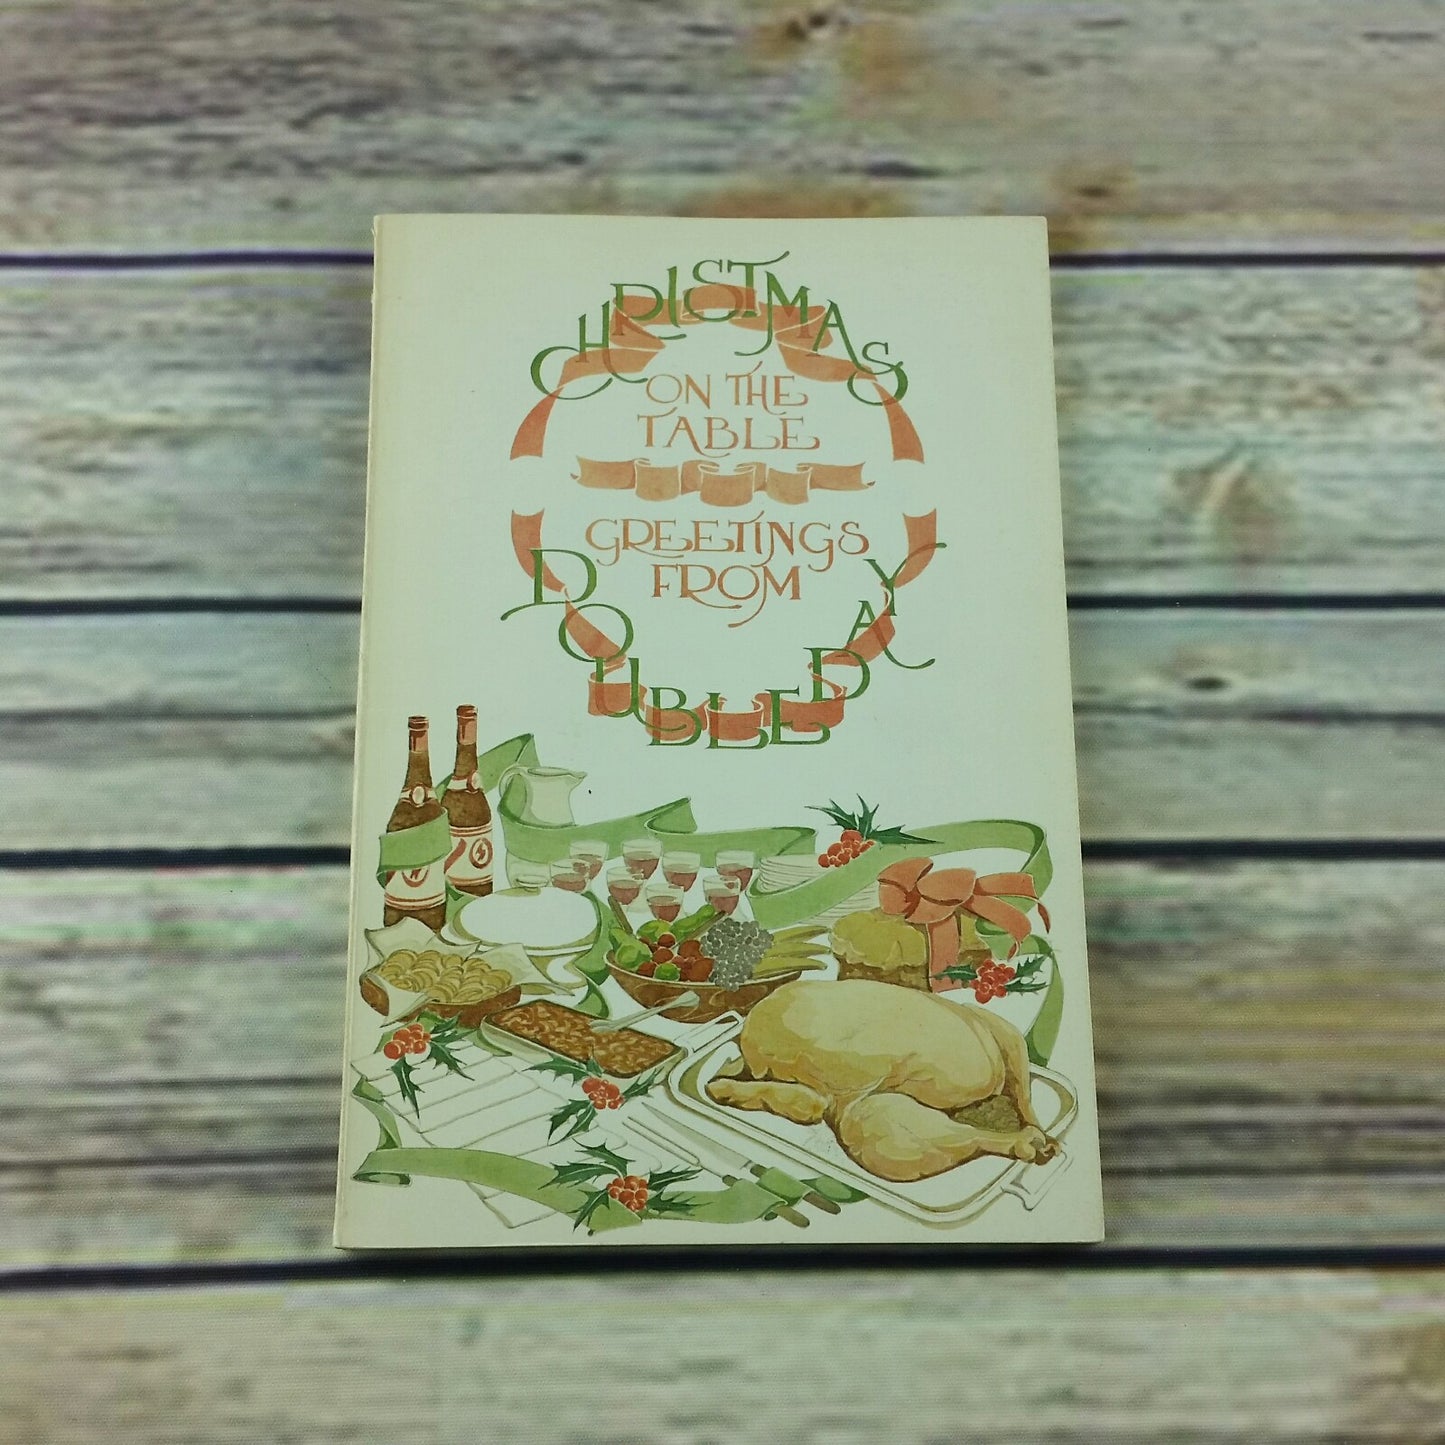 Vintage Cookbook Christmas on the Table Greetings from Doubleday Recipes 1979 Paperback - At Grandma's Table